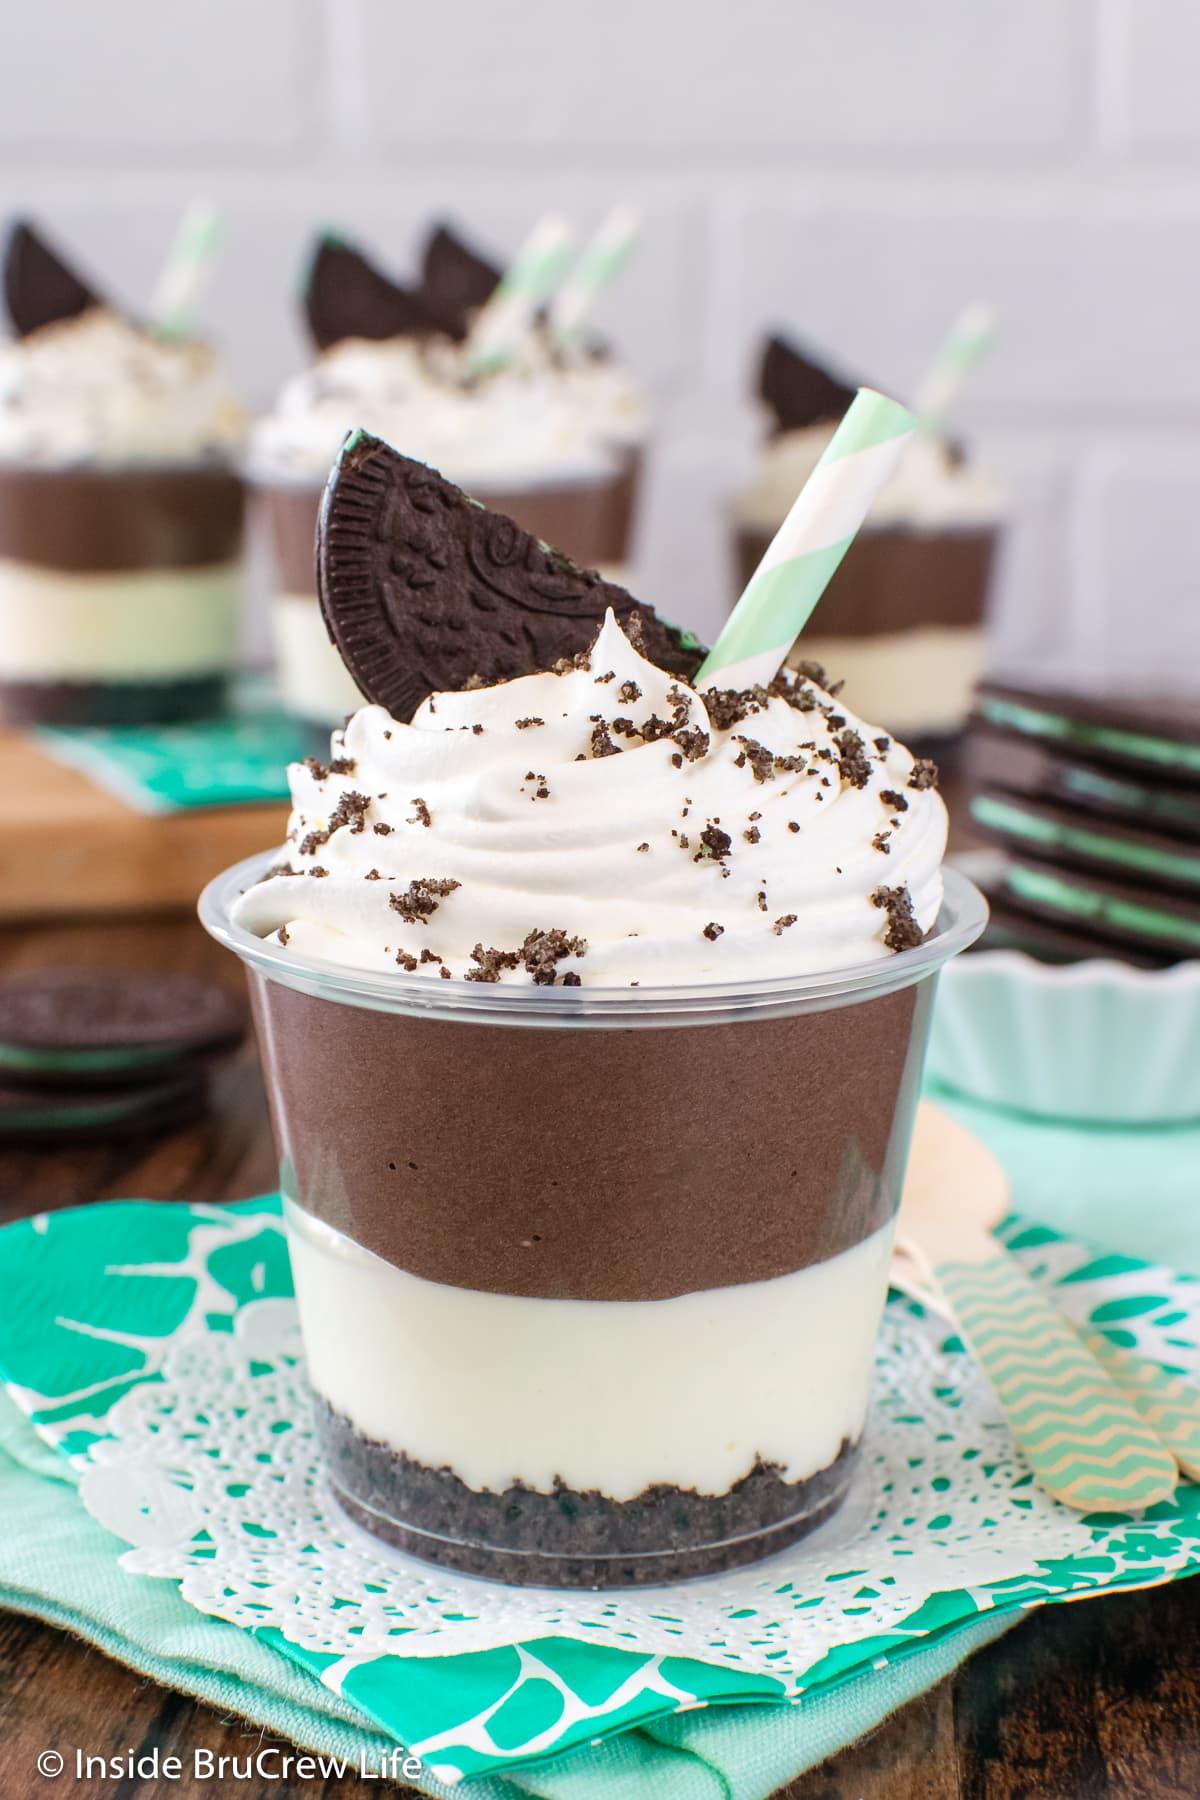 A small parfait cup filled with chocolate mint cheesecake filling.